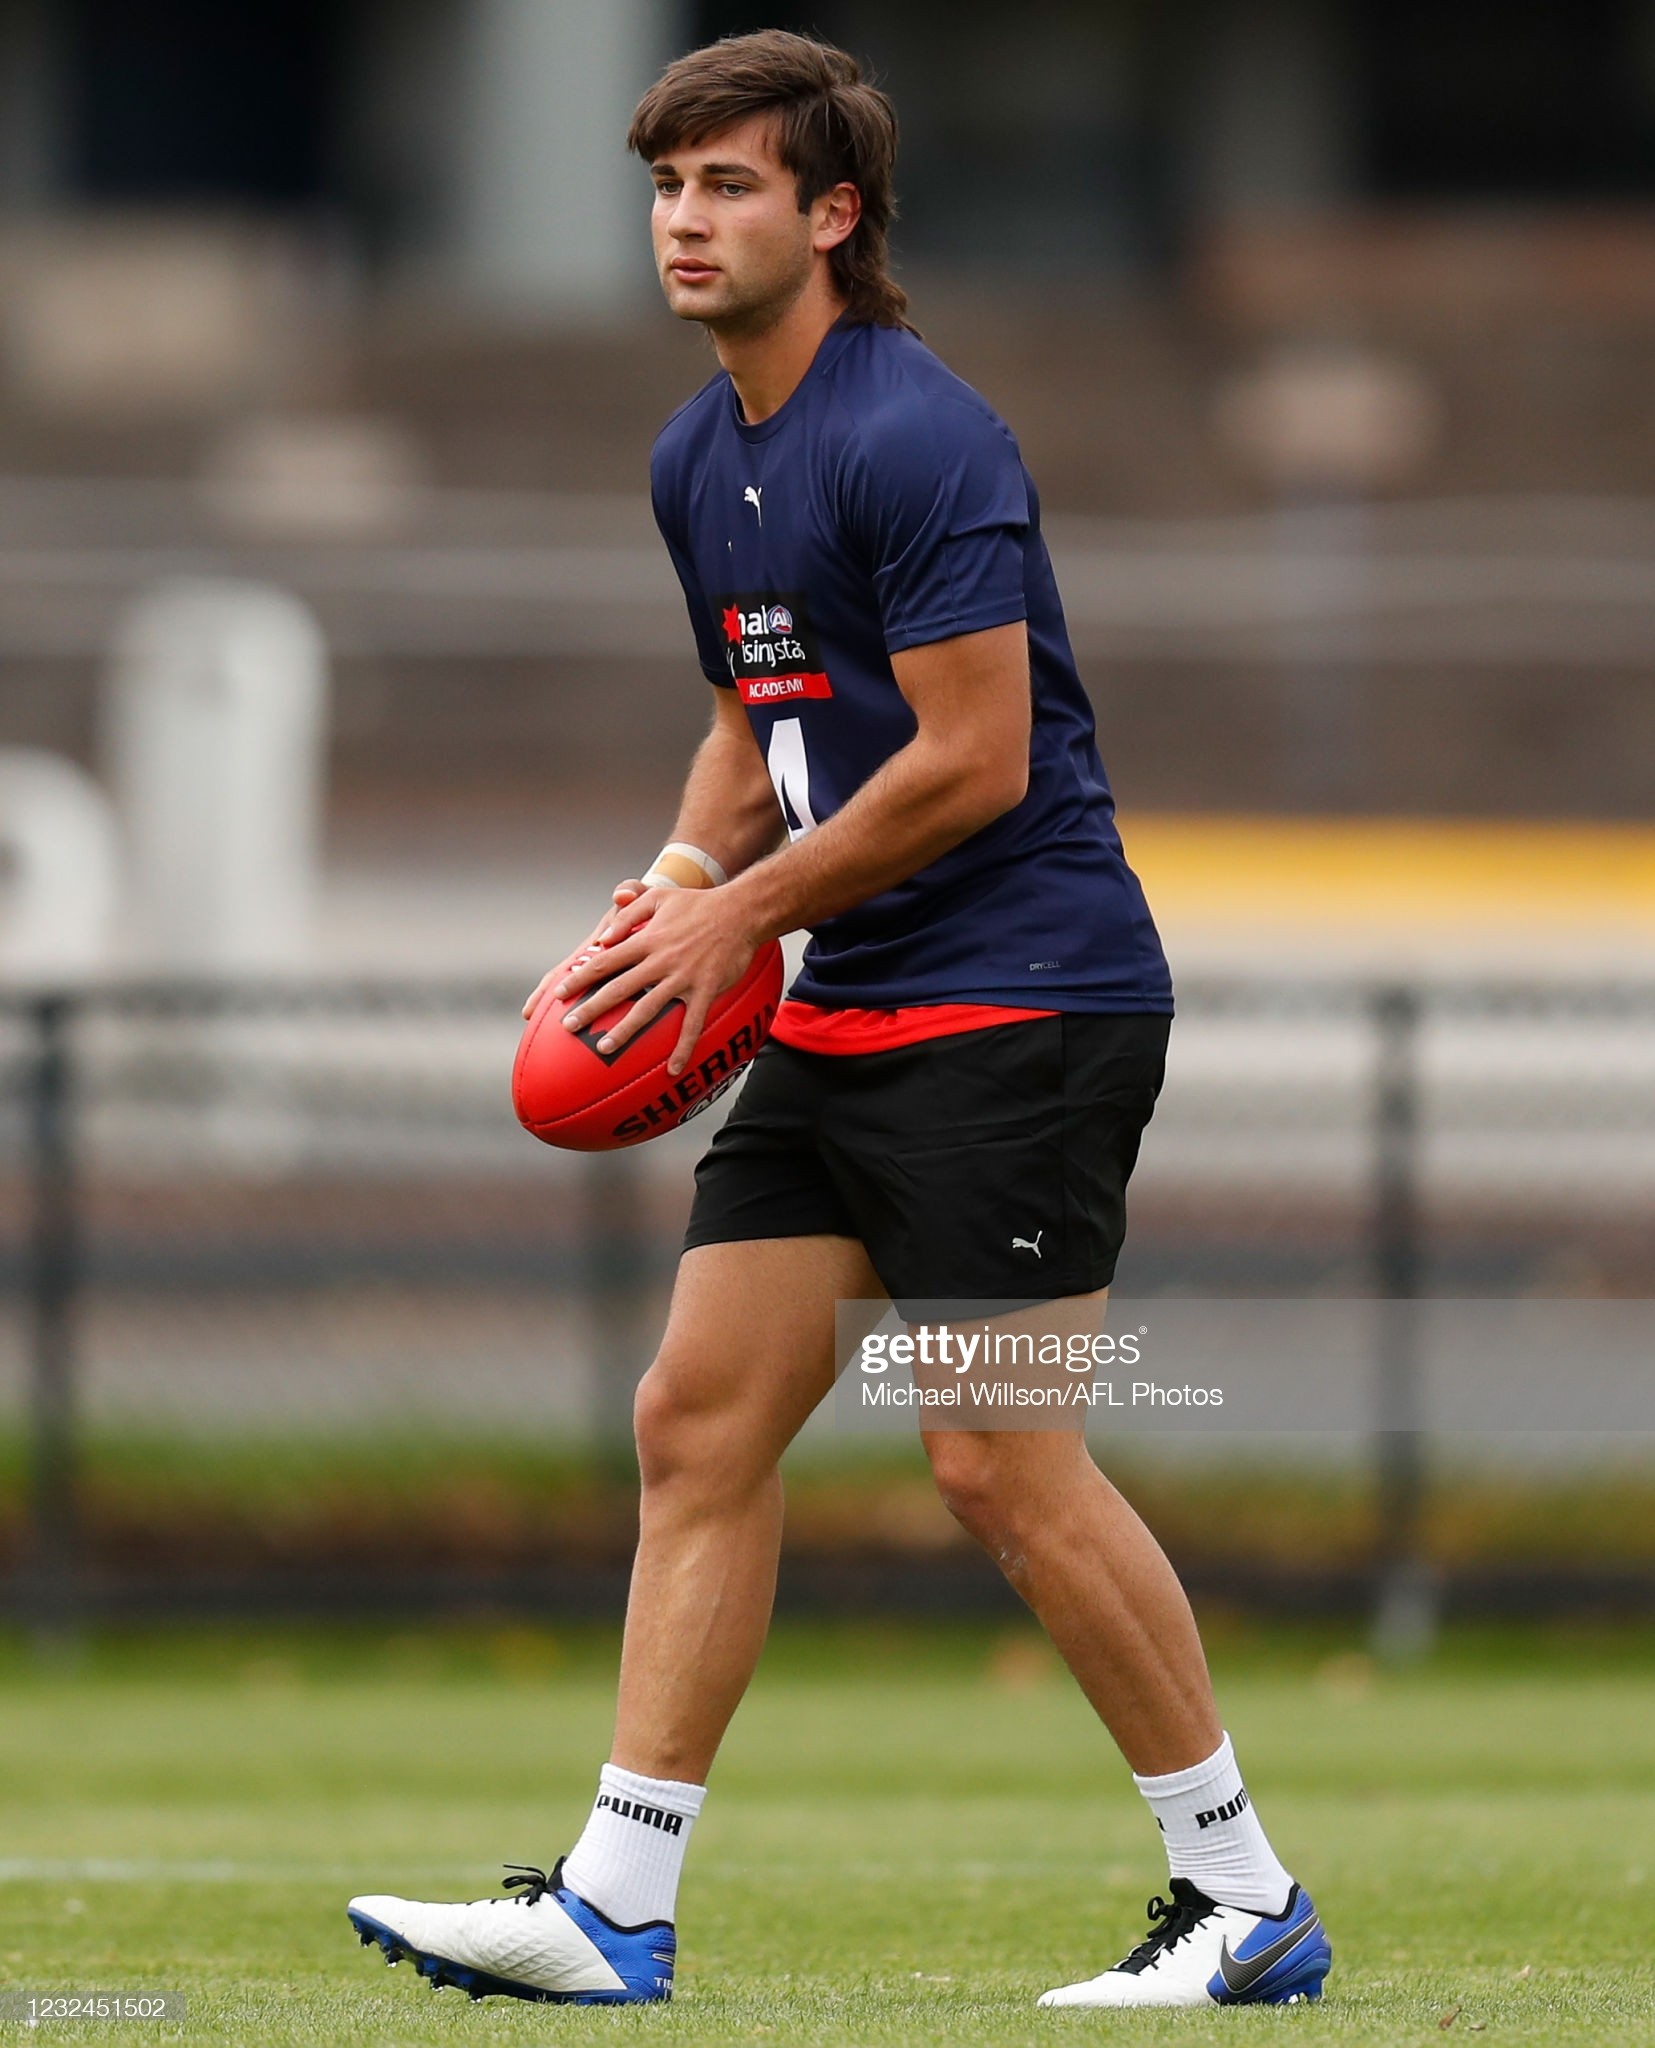 josh-rachele-in-action-during-the-nab-afl-academy-training-session-at-picture-id1232451502